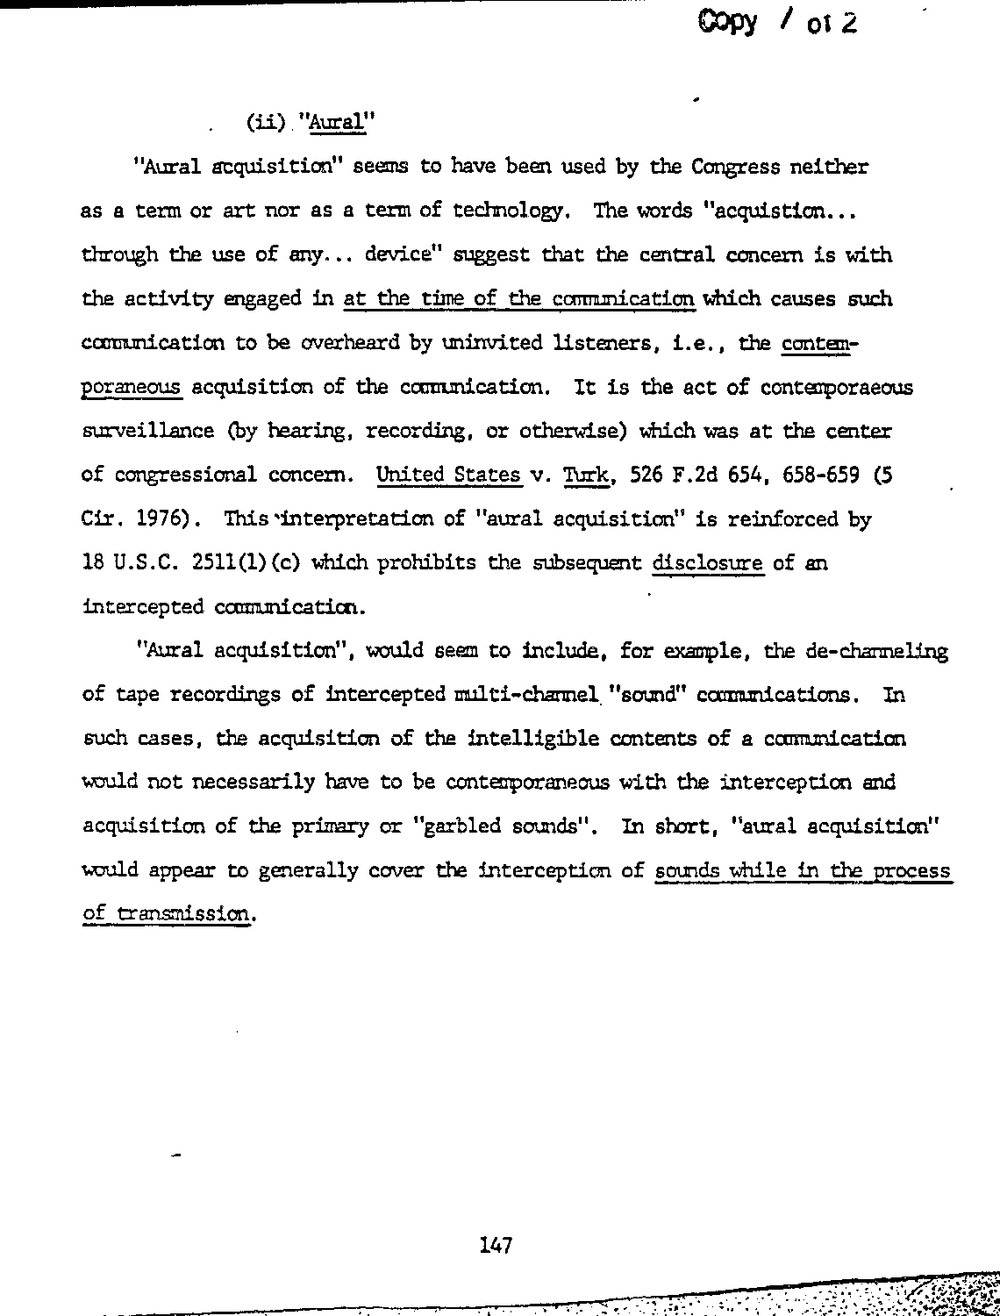 Page 155 from Report on Inquiry Into CIA Related Electronic Surveillance Activities